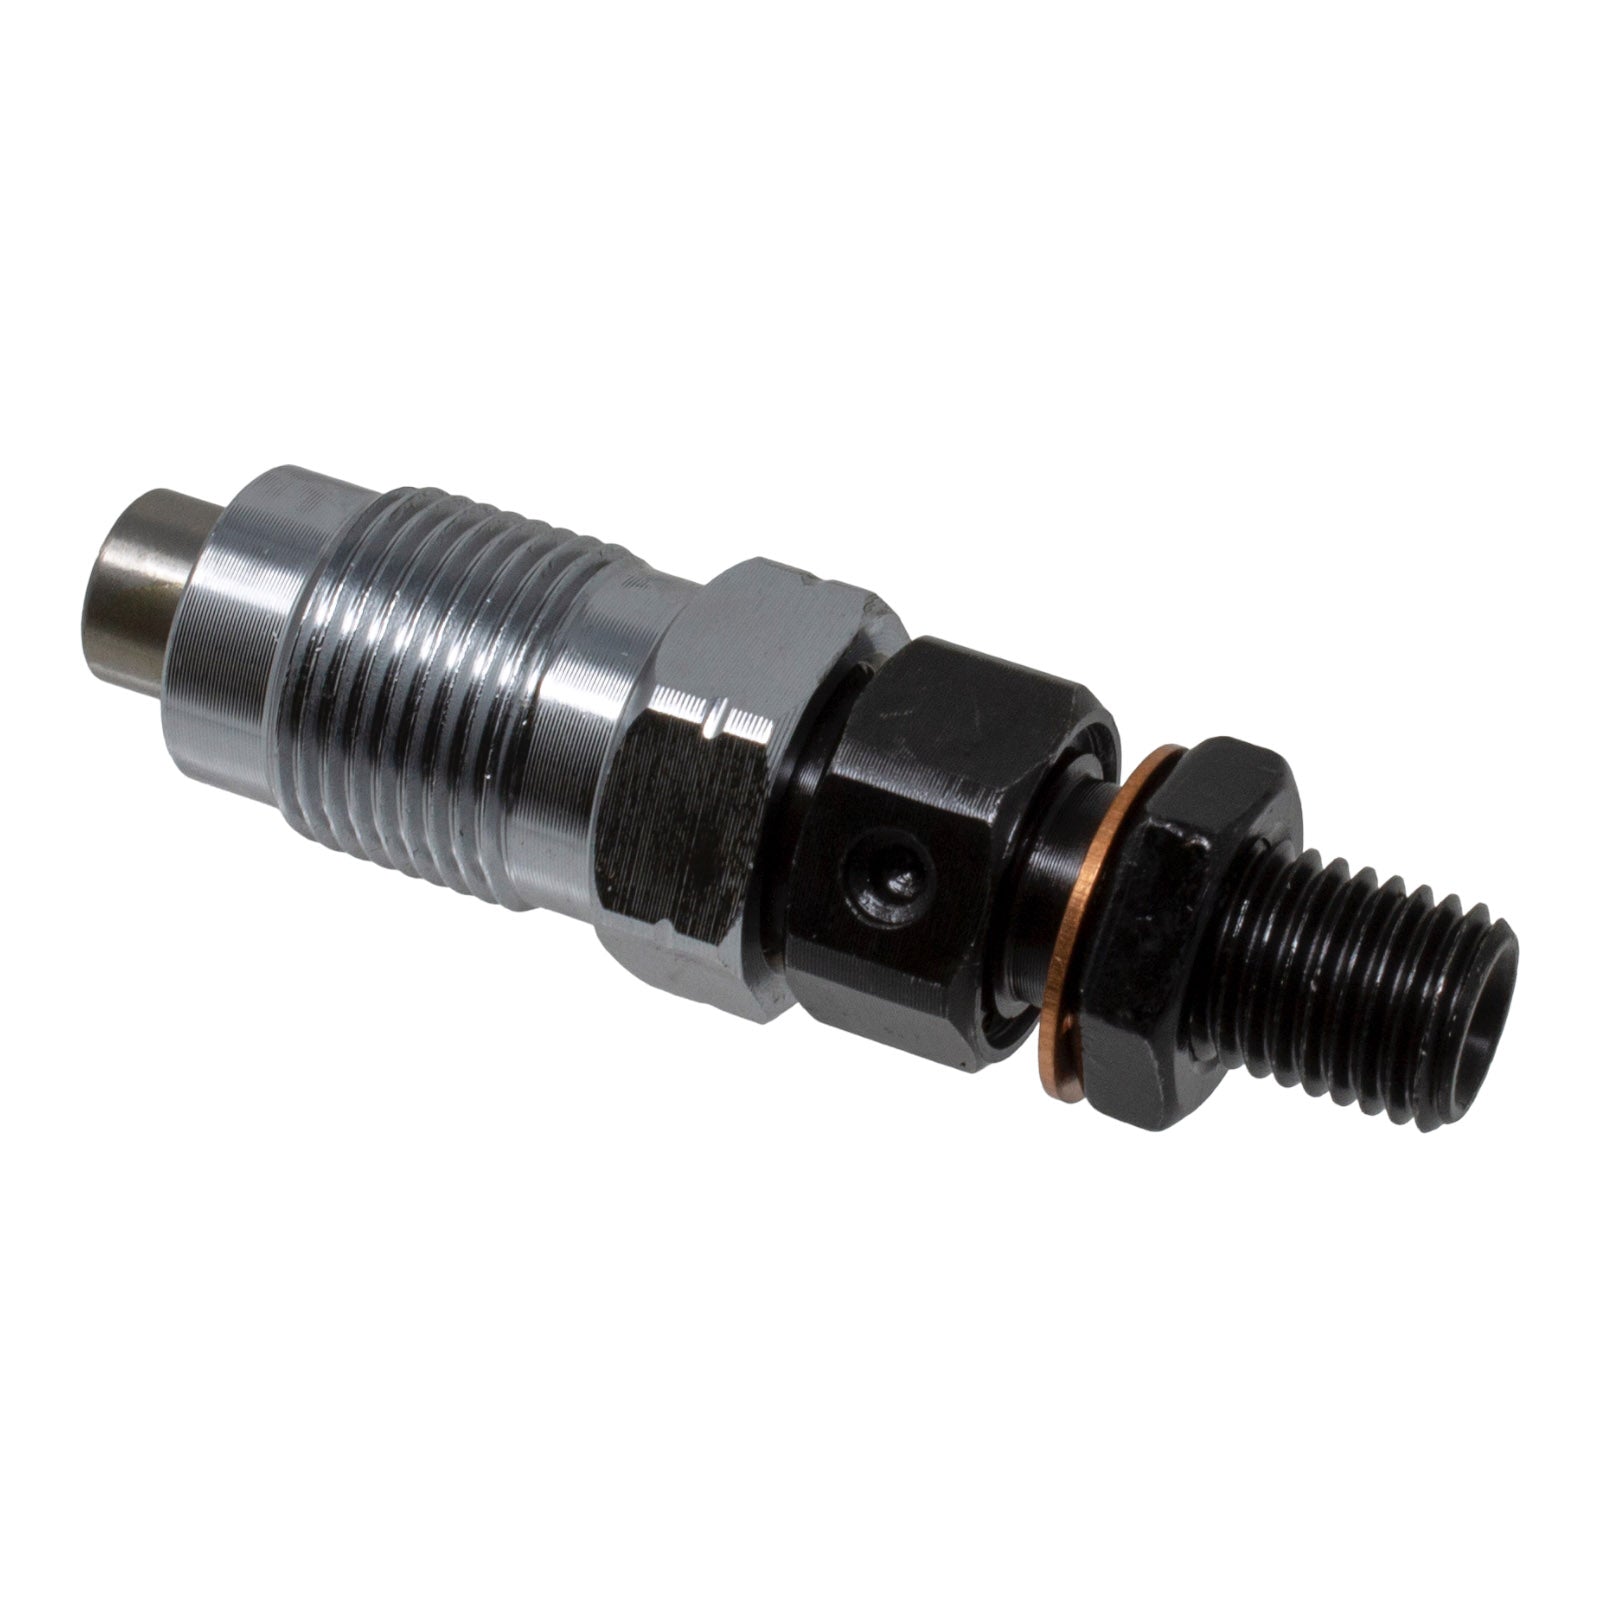 16032-53000, Fuel Injector For Kubota at Duraforce